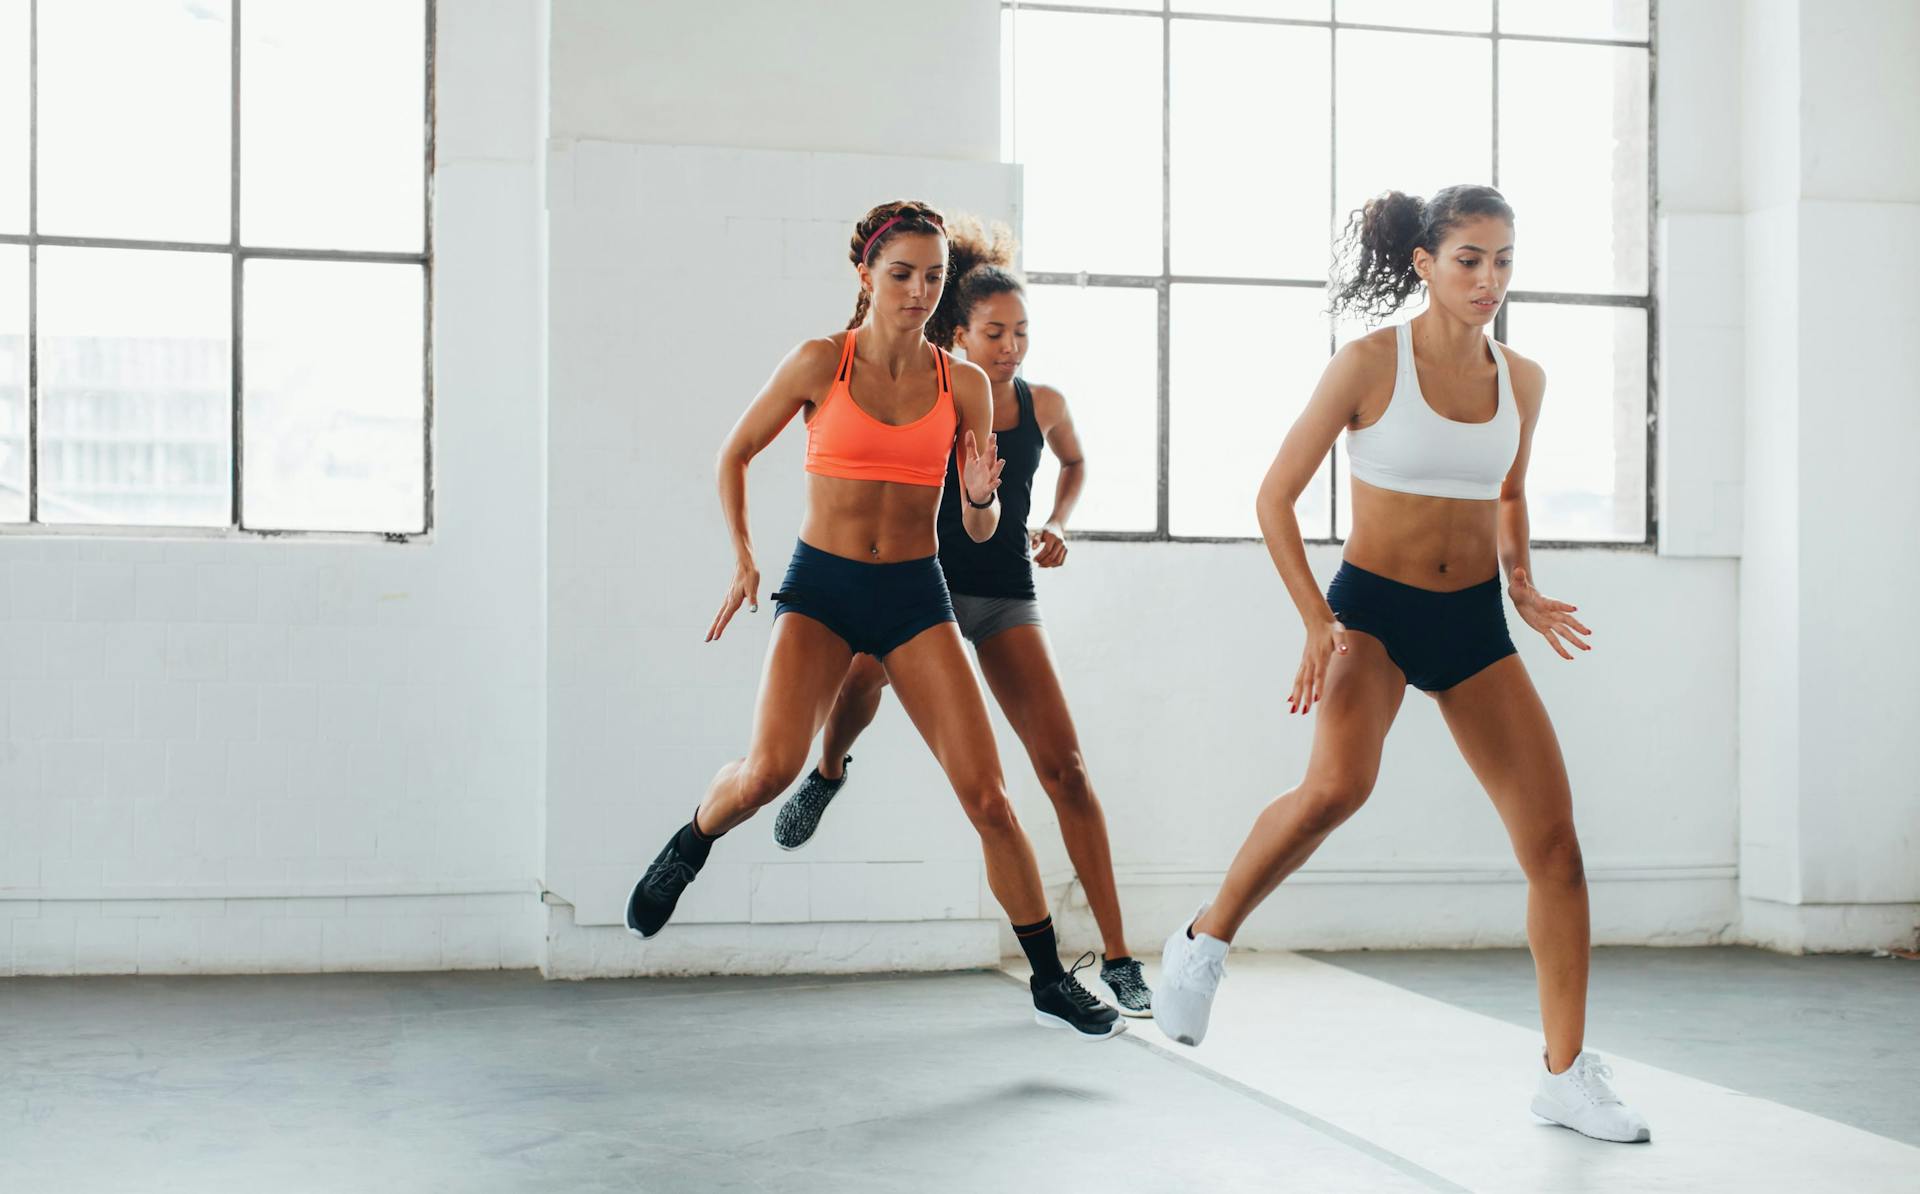 Three women wearing sports bras and shorts in a fitness class in a gym with bare walls and large windows jumping from foot to foot